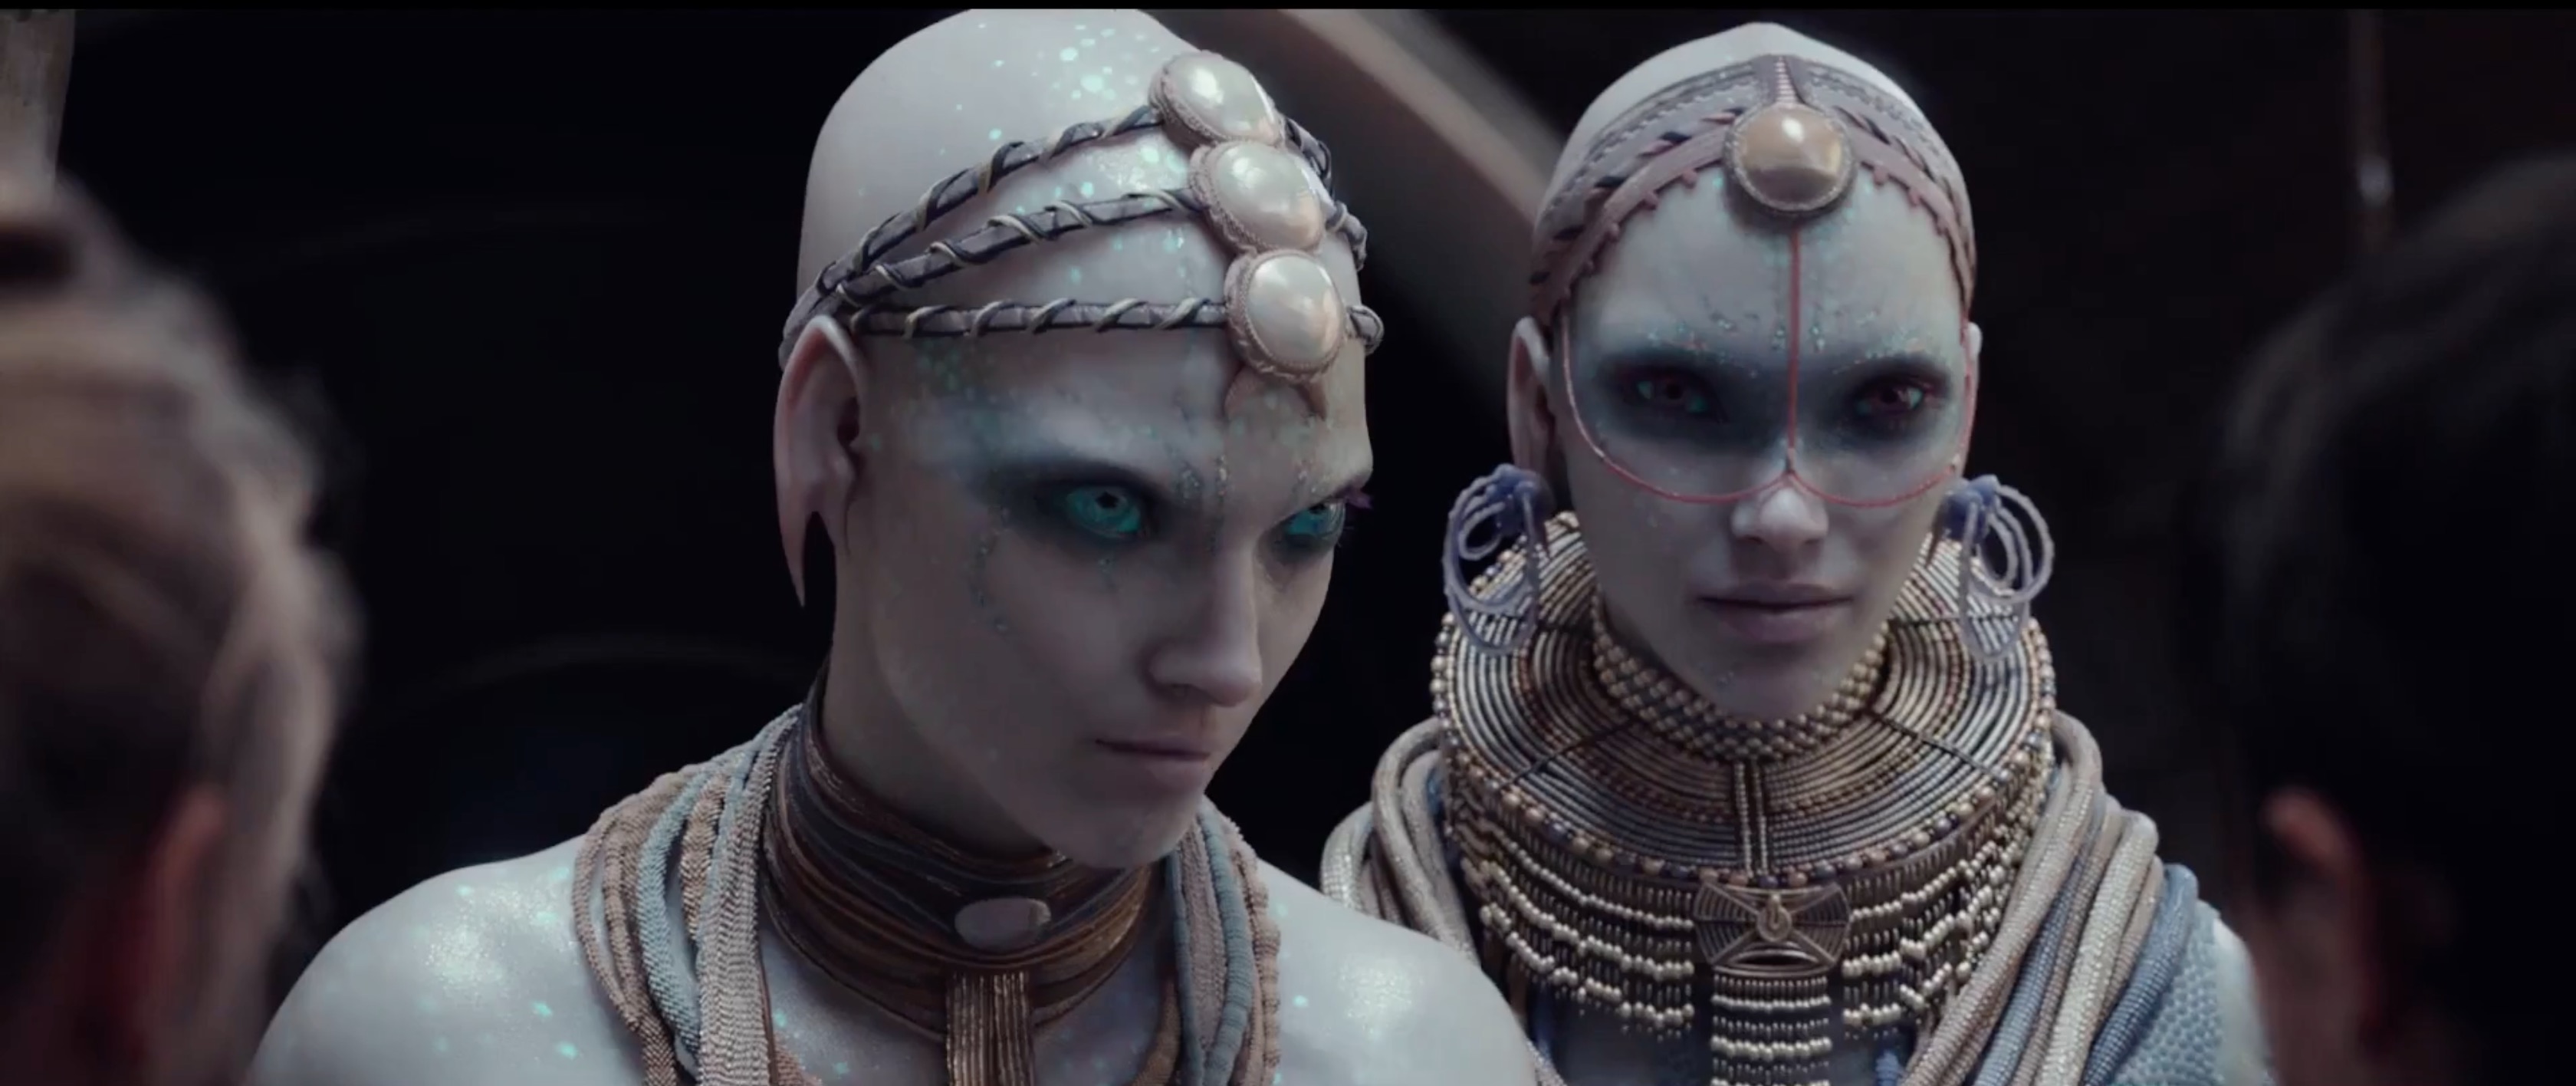 Валериан и город тысячи планет (Valerian and the City of a Thousand Planets)